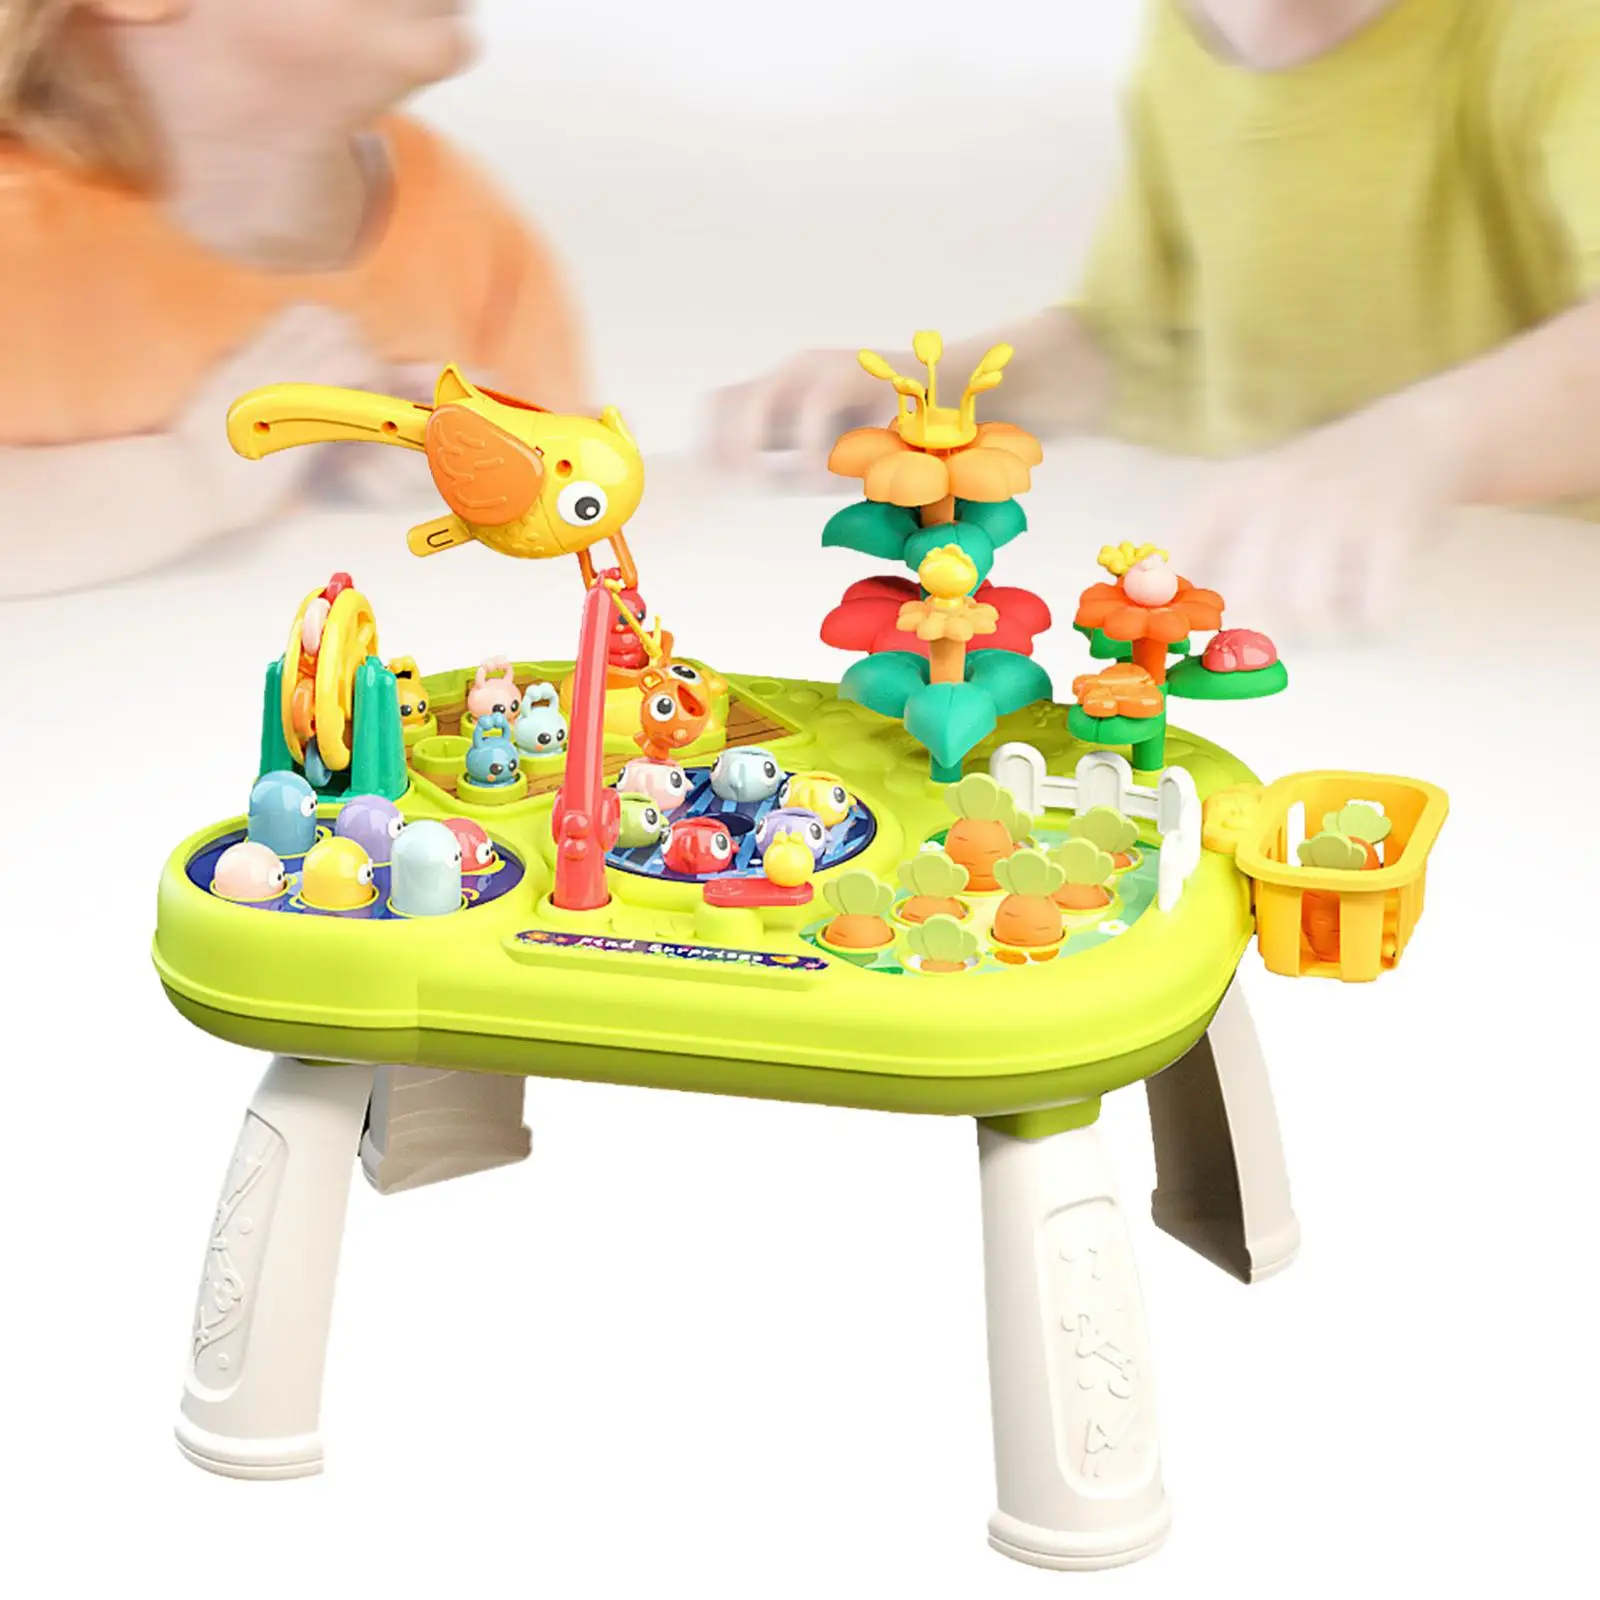 

Baby Activity Table, Preschool Learning Toy Sensory Toys Fishing Game for Age 3 4 5 6 Gifts